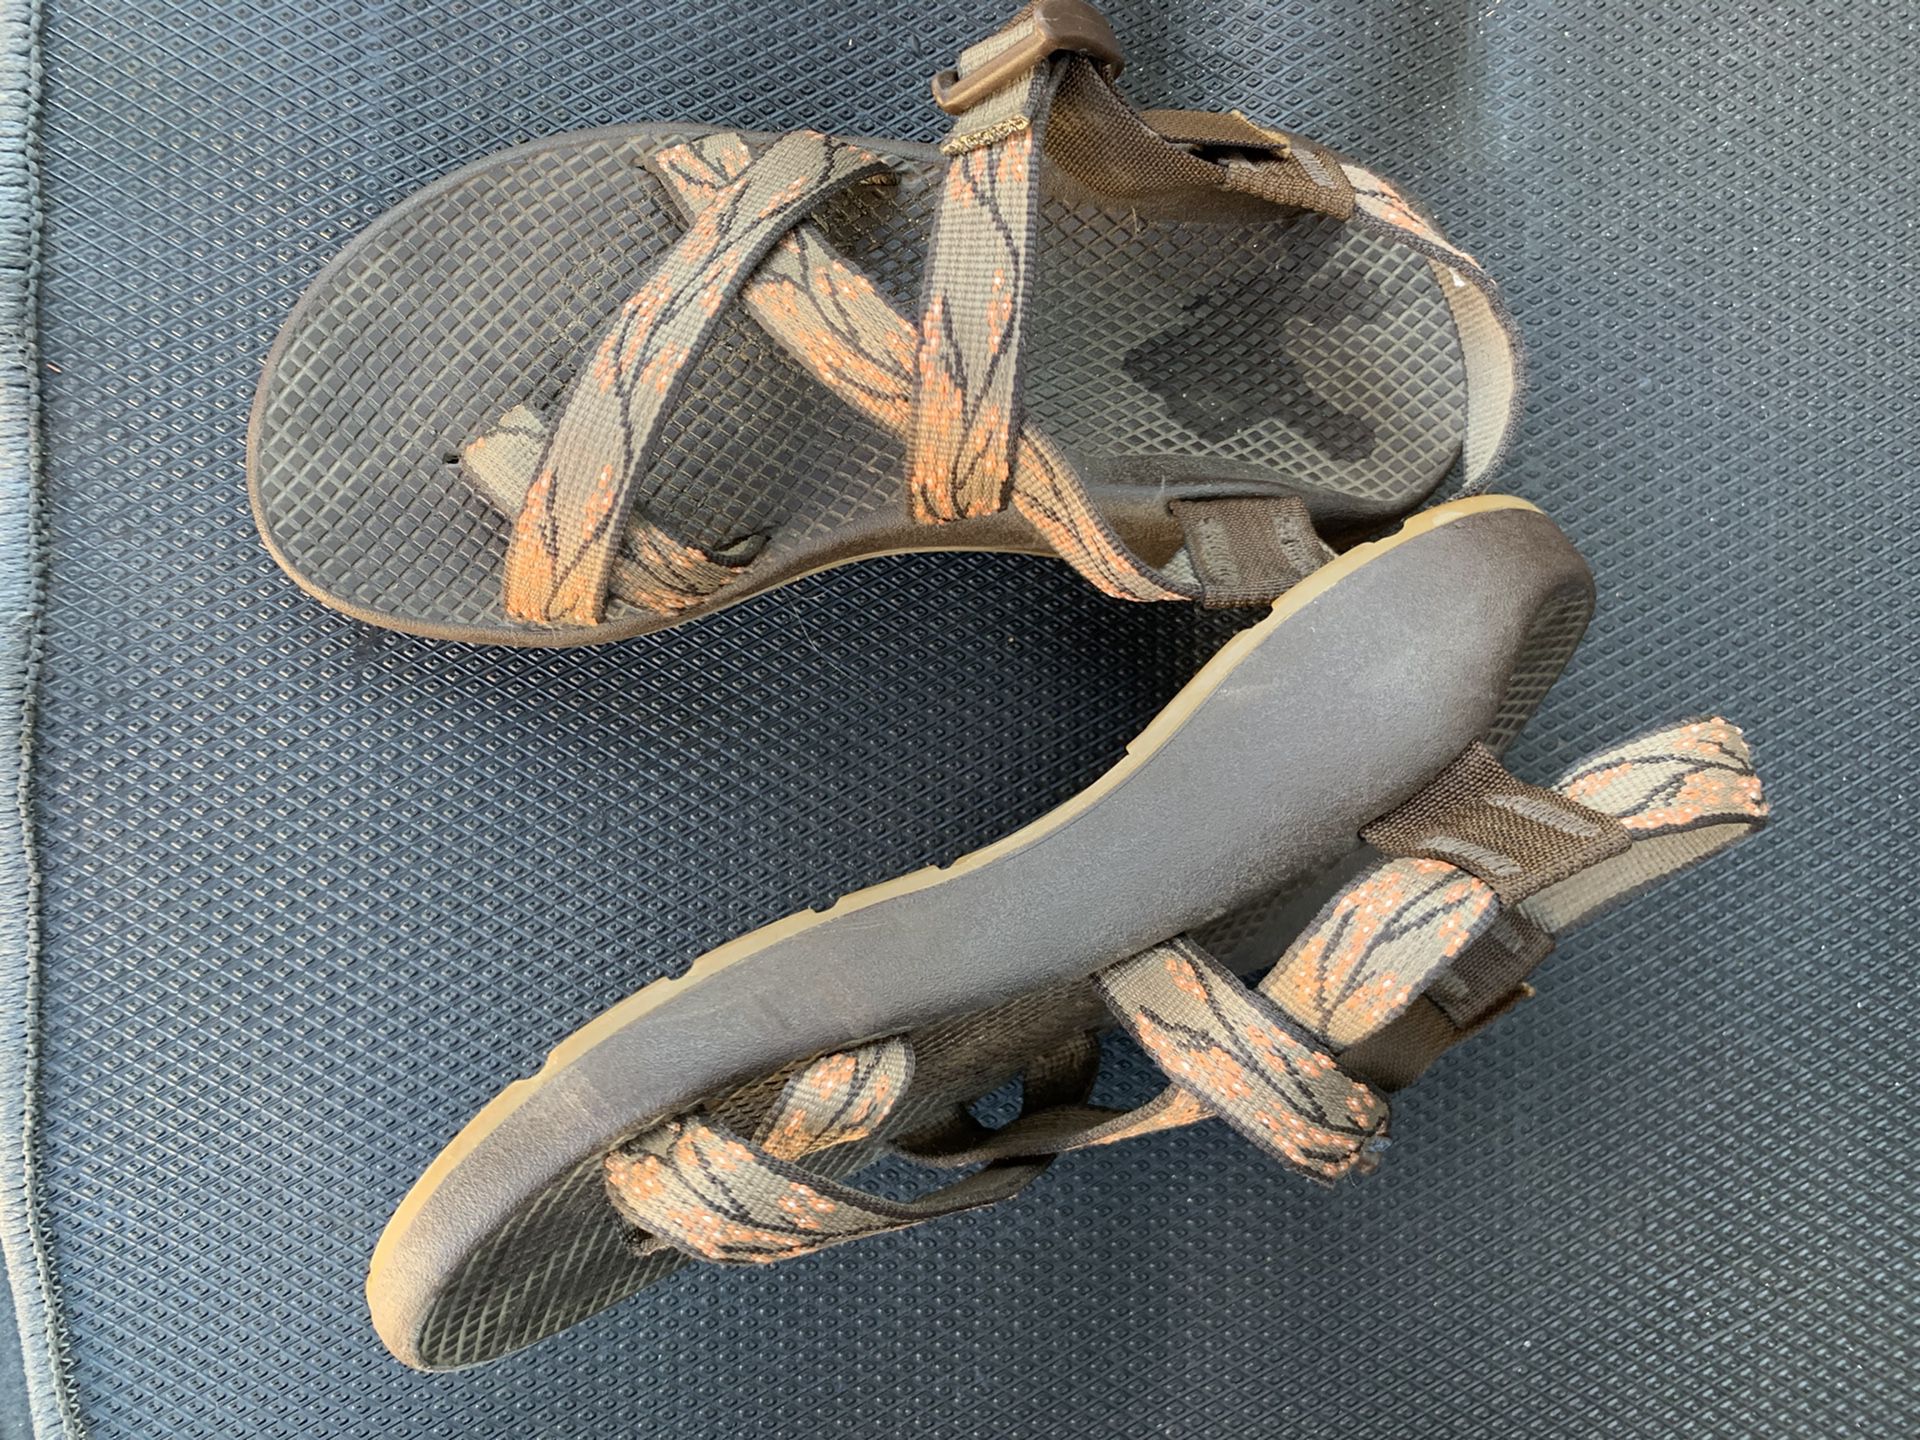 Chaco Sandals